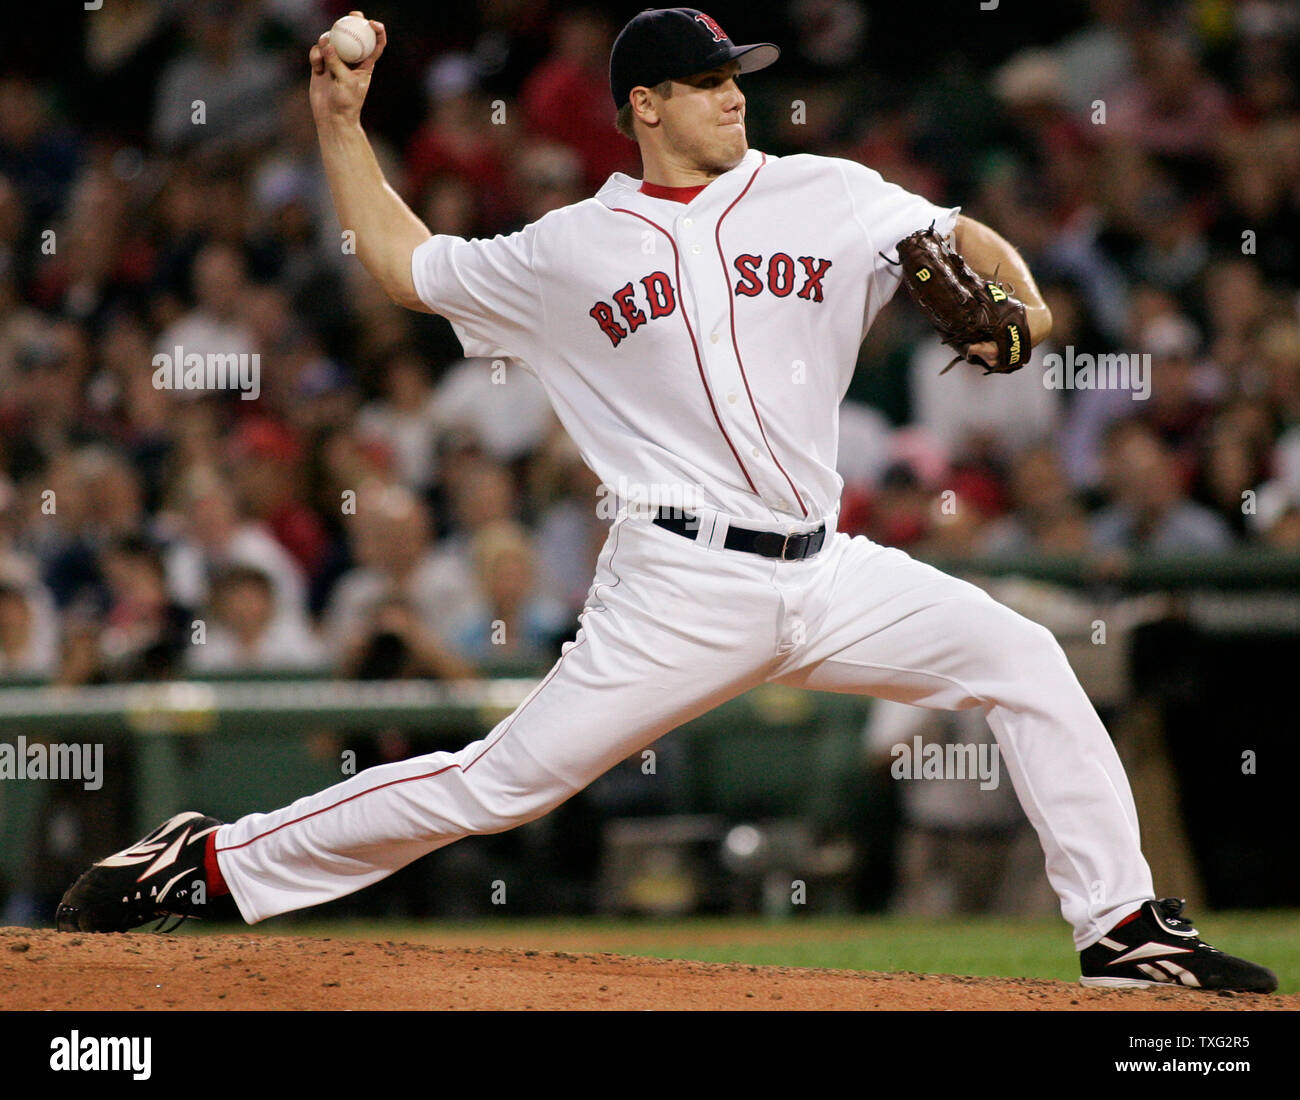 Boston Red Sox closing pitcher Jonathan Papelbon throws a pitch in the  ninth inning against the Colorado Rockies at Fenway Park in Boston on June  12, 2007. The Red Sox defeated the